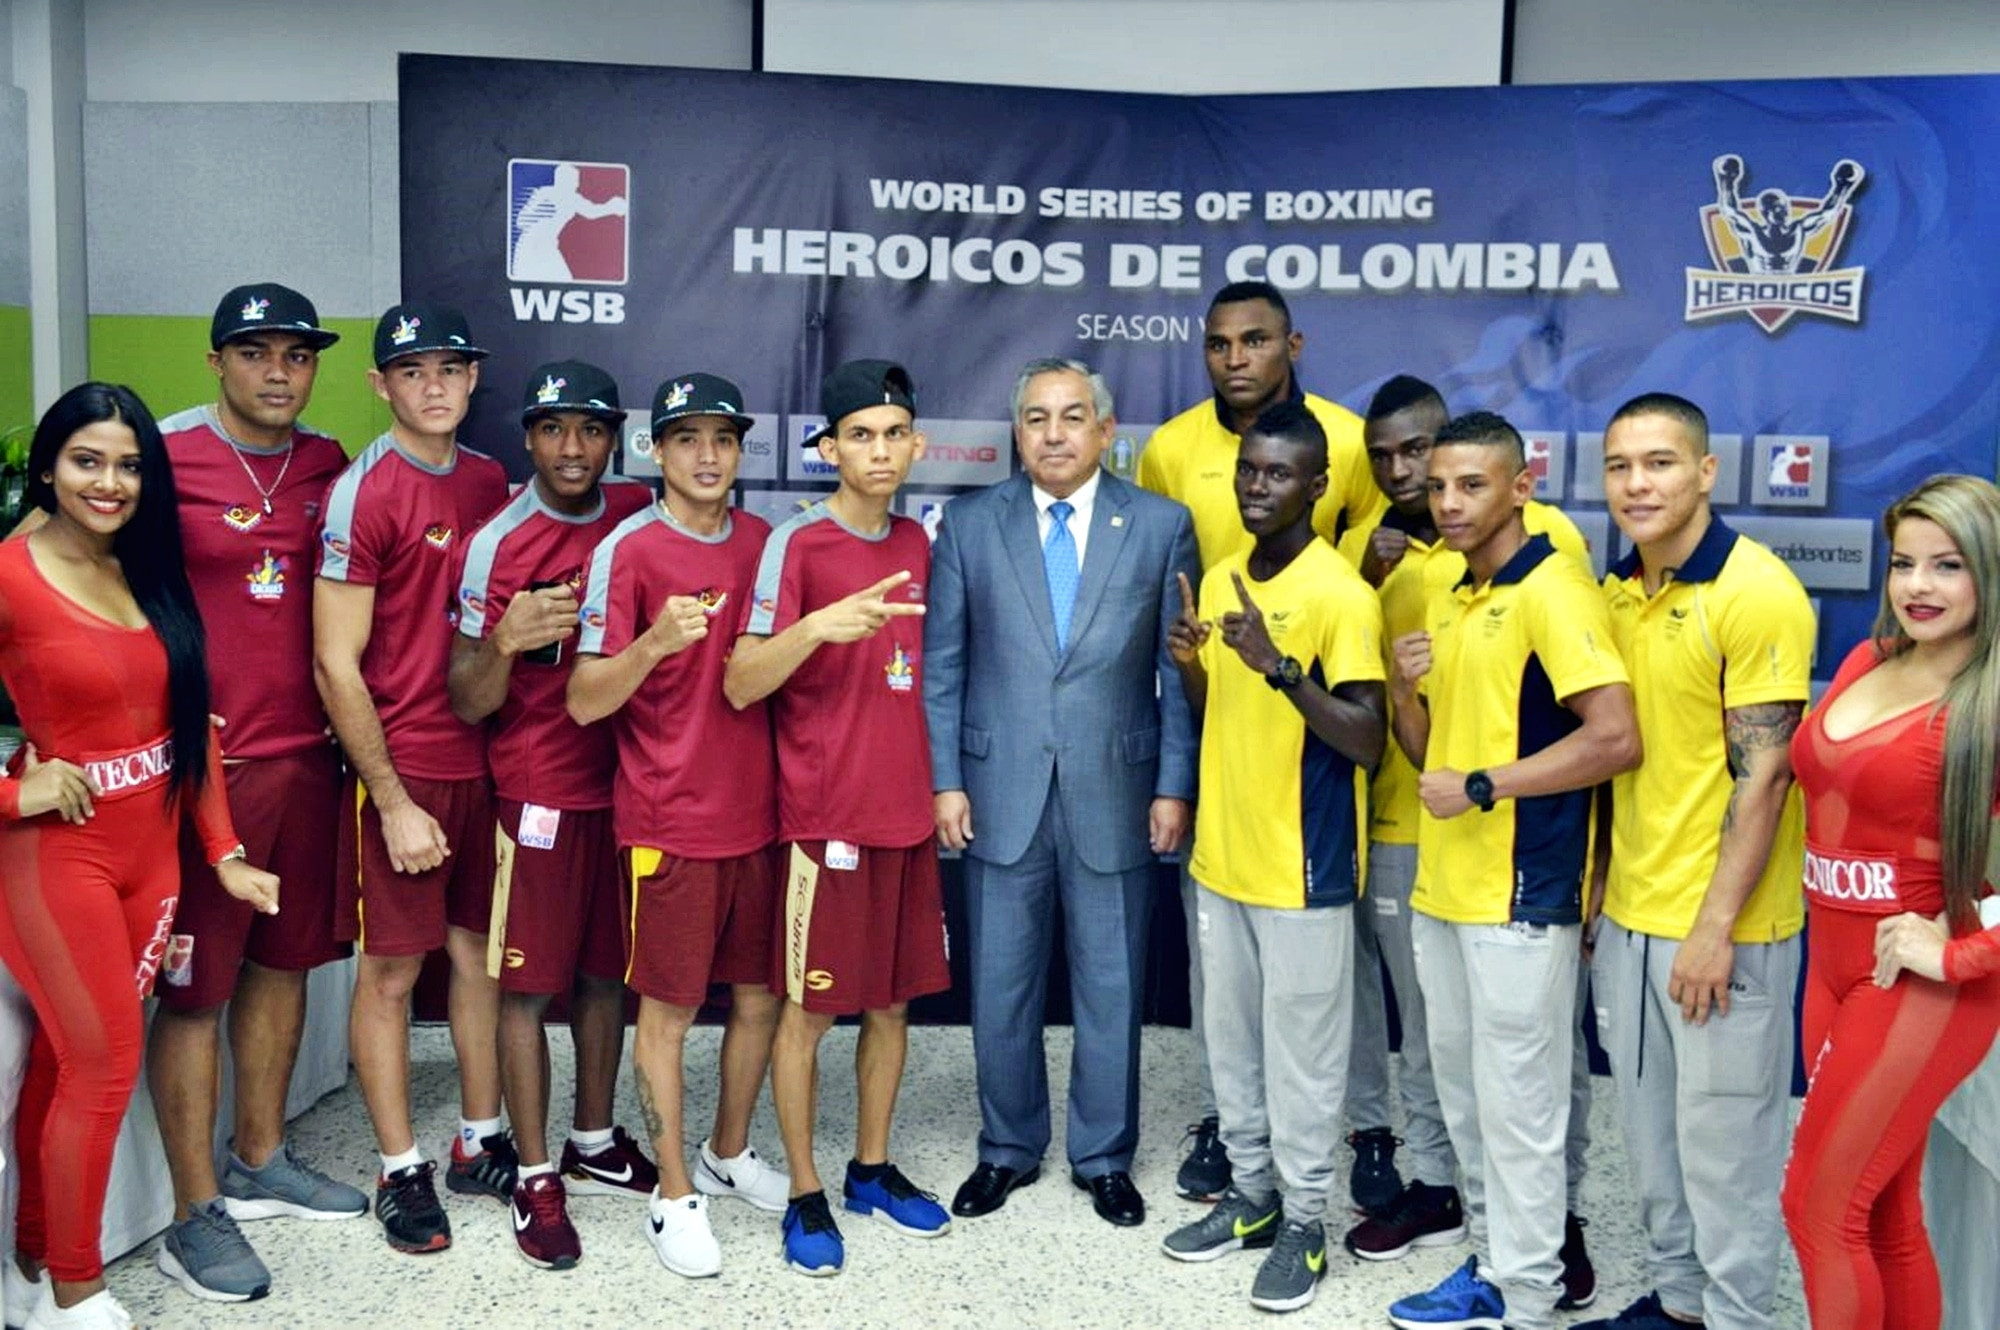 Caciques Venezuela and Colombia Heroicos have now both earned a win this season ©WSB